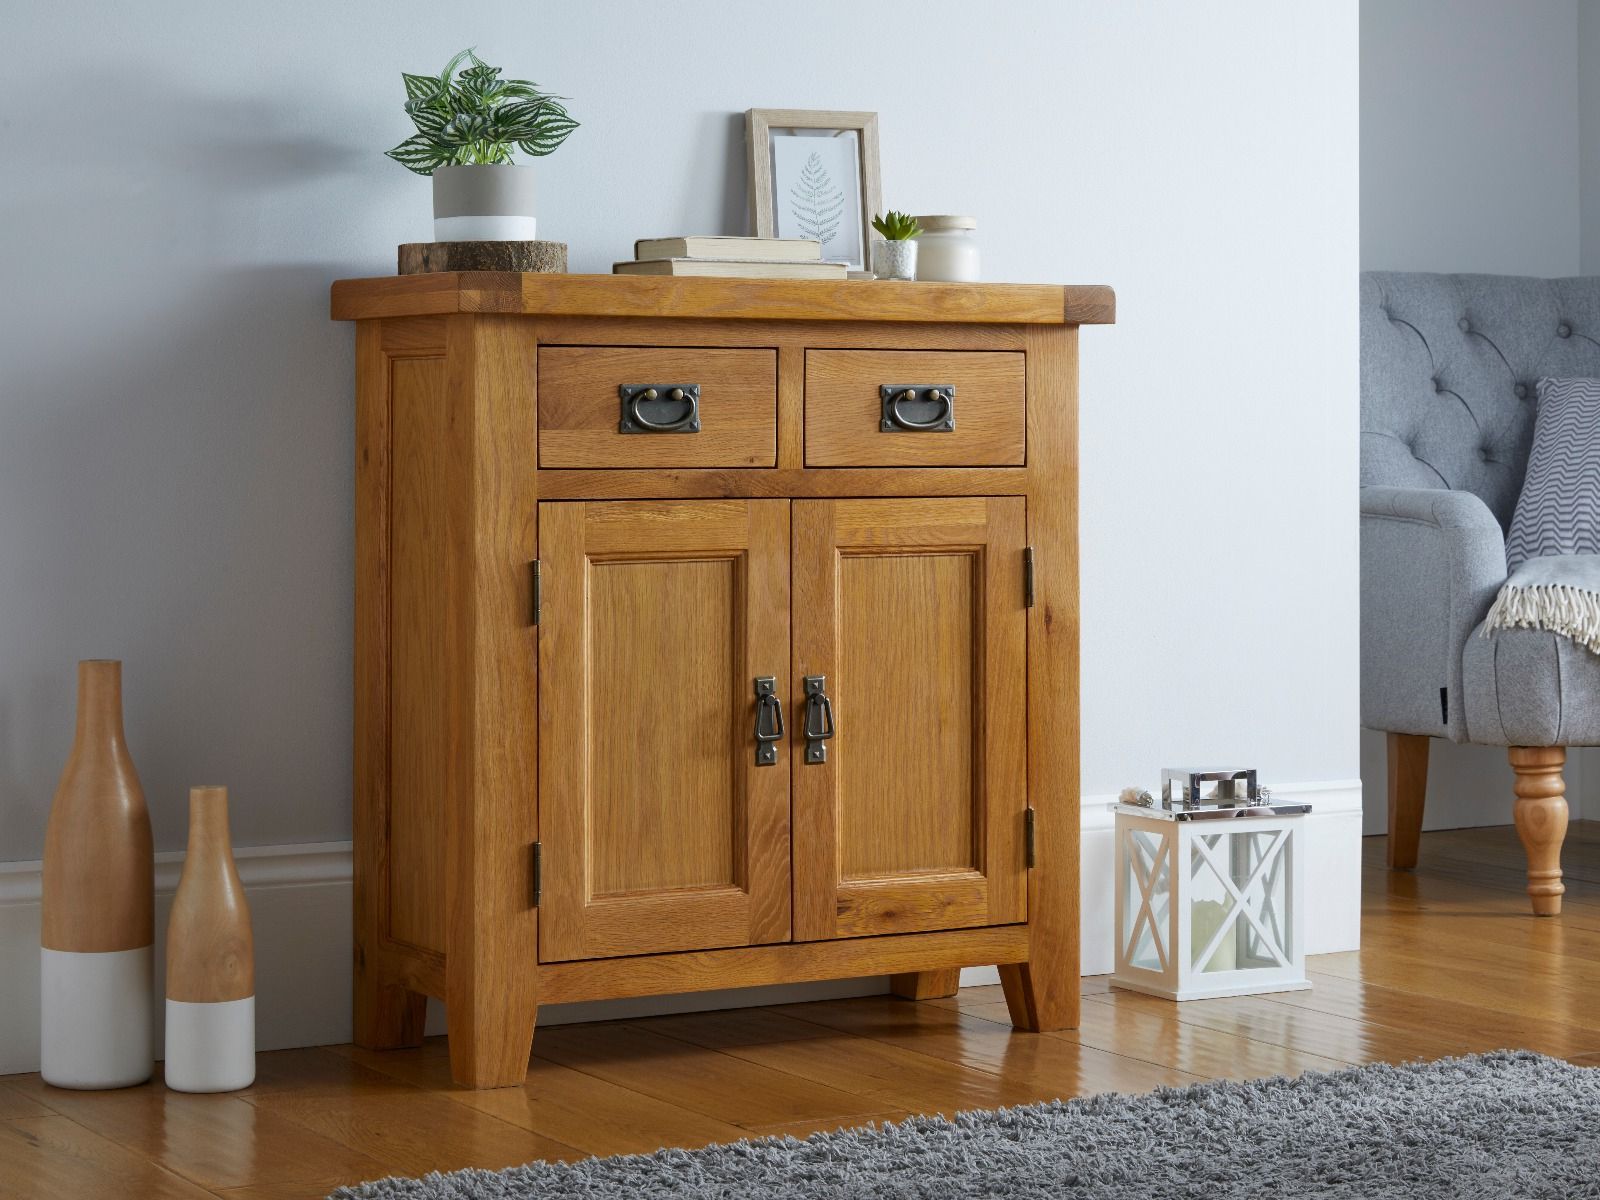 Small Oak Sideboard 80cm – Free Delivery | Top Furniture With Regard To Rustic Oak Sideboards (View 17 of 20)